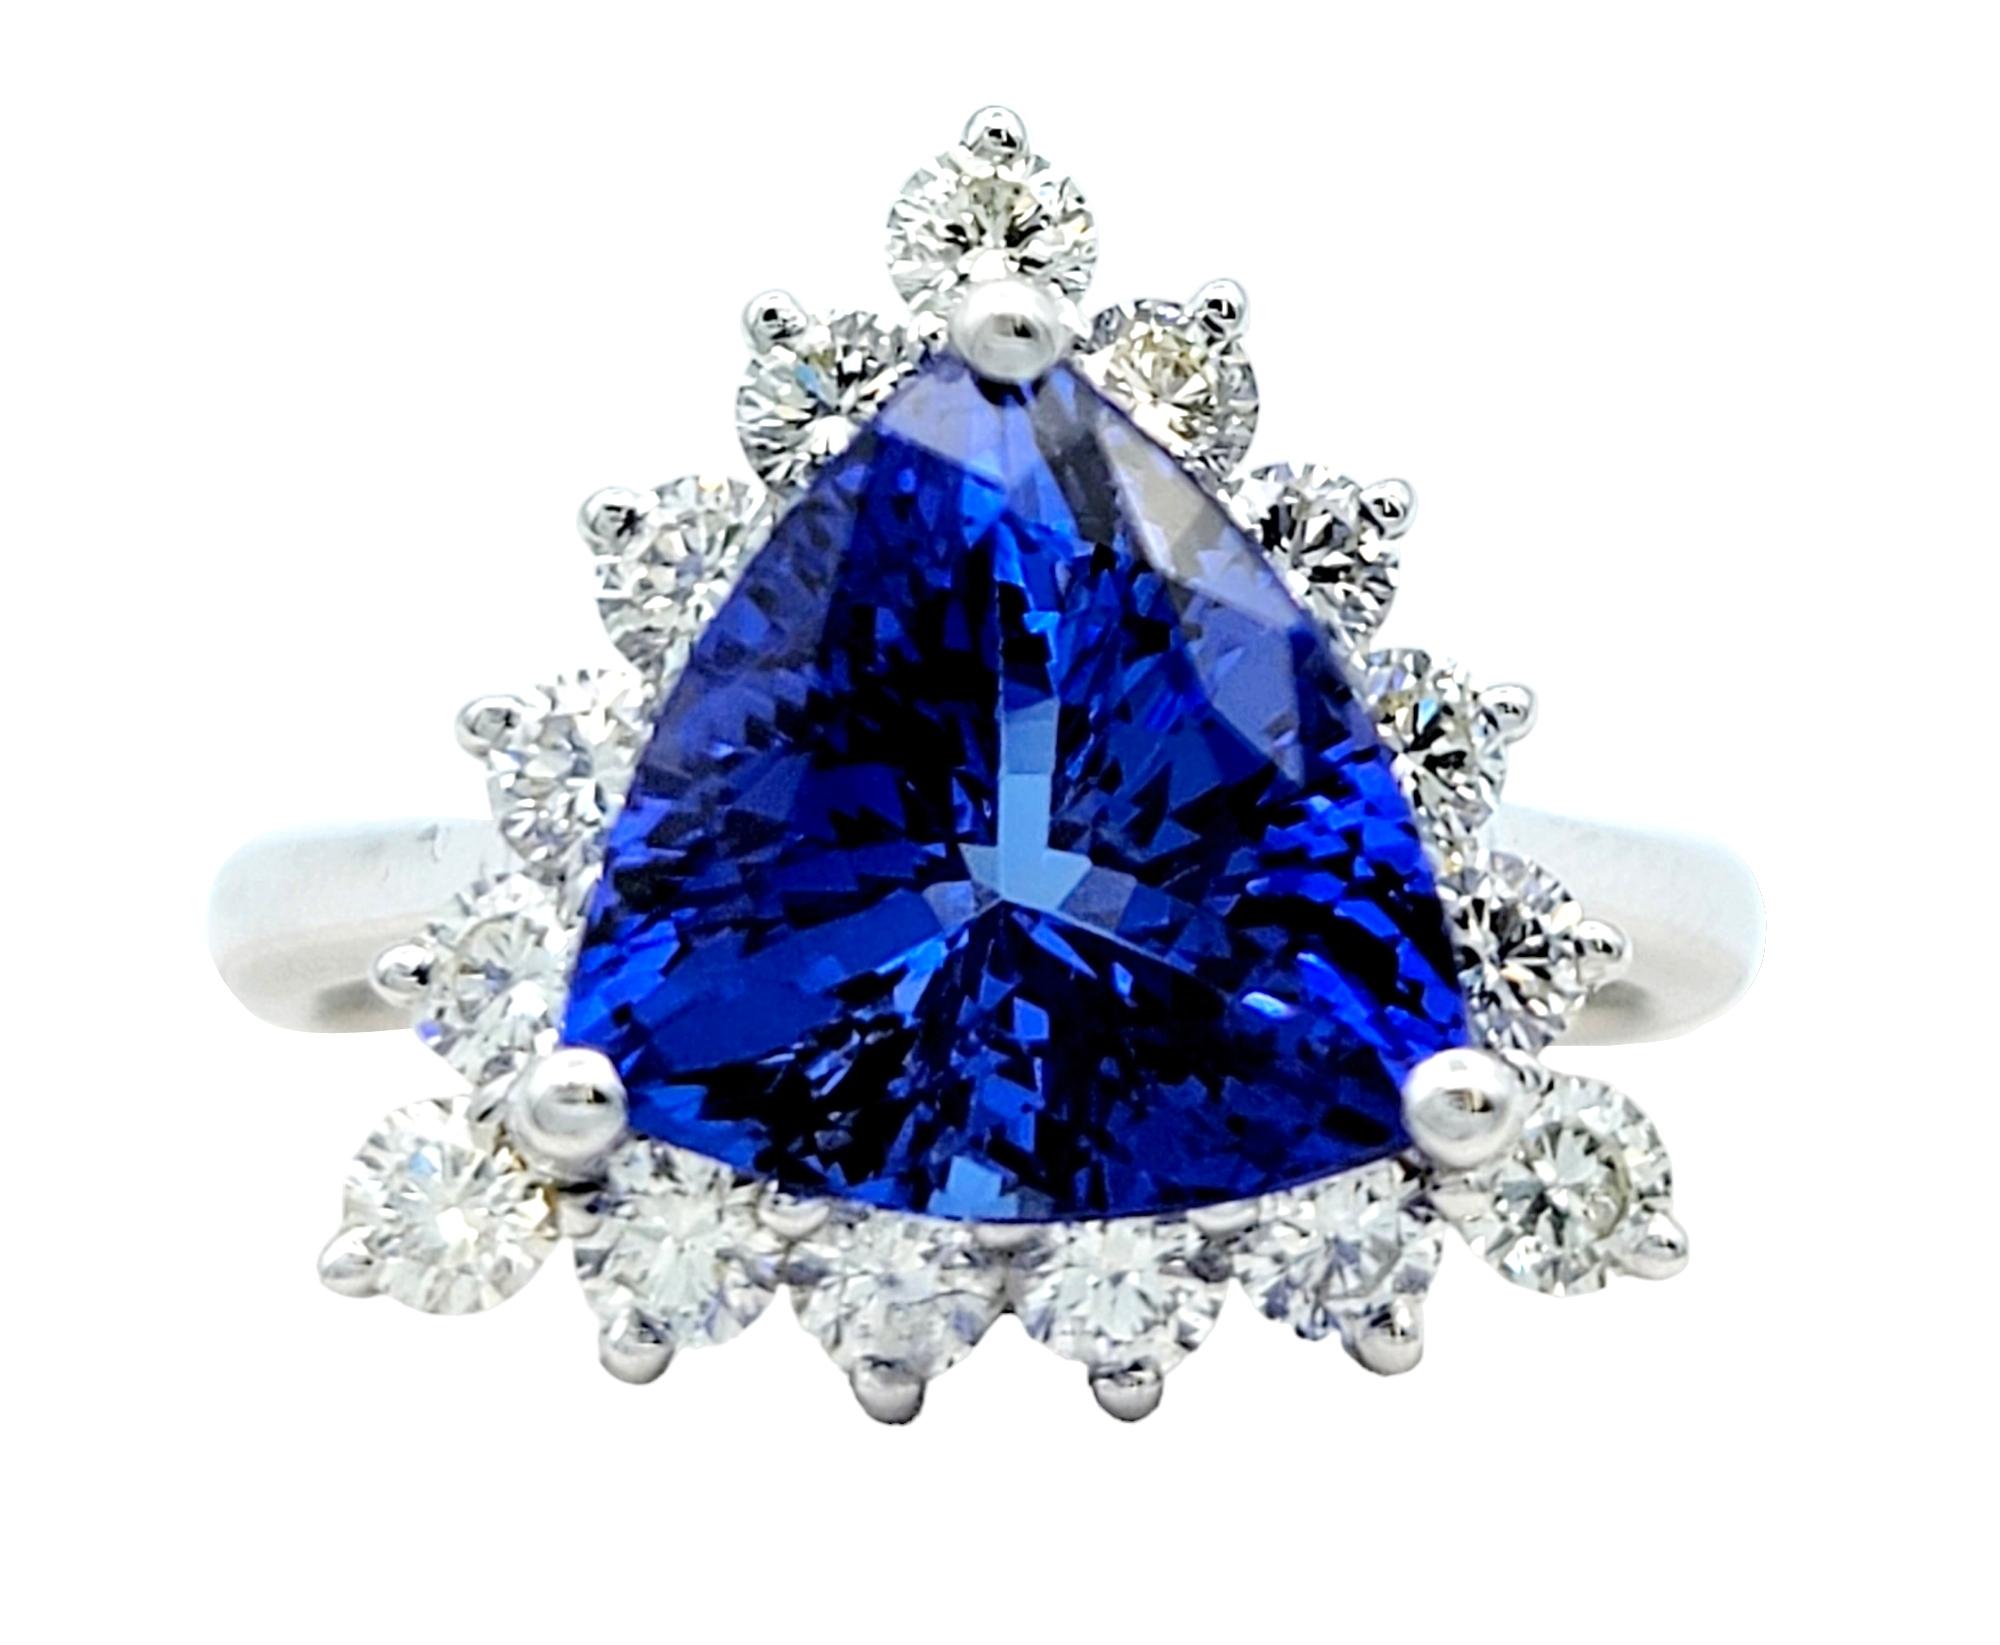 Ring size: 6.5

This exquisite trillion-cut tanzanite ring, adorned with a dazzling diamond halo, is a true embodiment of elegance and charm. The beautiful tanzanite centerpiece boasts a mesmerizing violetish- blue color that absolutely radiates on